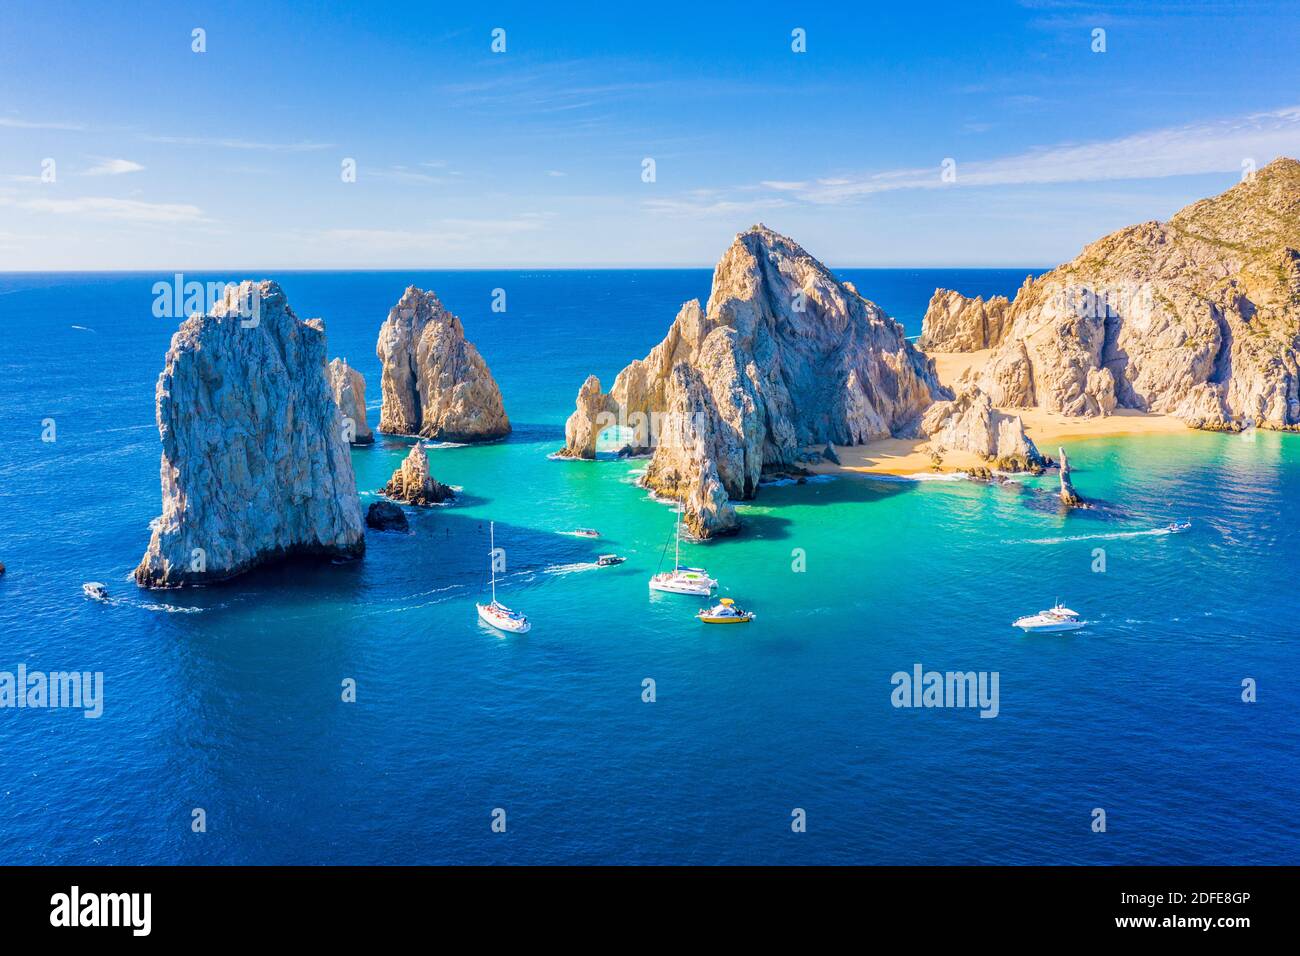 Aerial view of the Arch (El Arco) of Cabo San Lucas, Mexico, at the southernmost tip of the Baja California peninsula Stock Photo